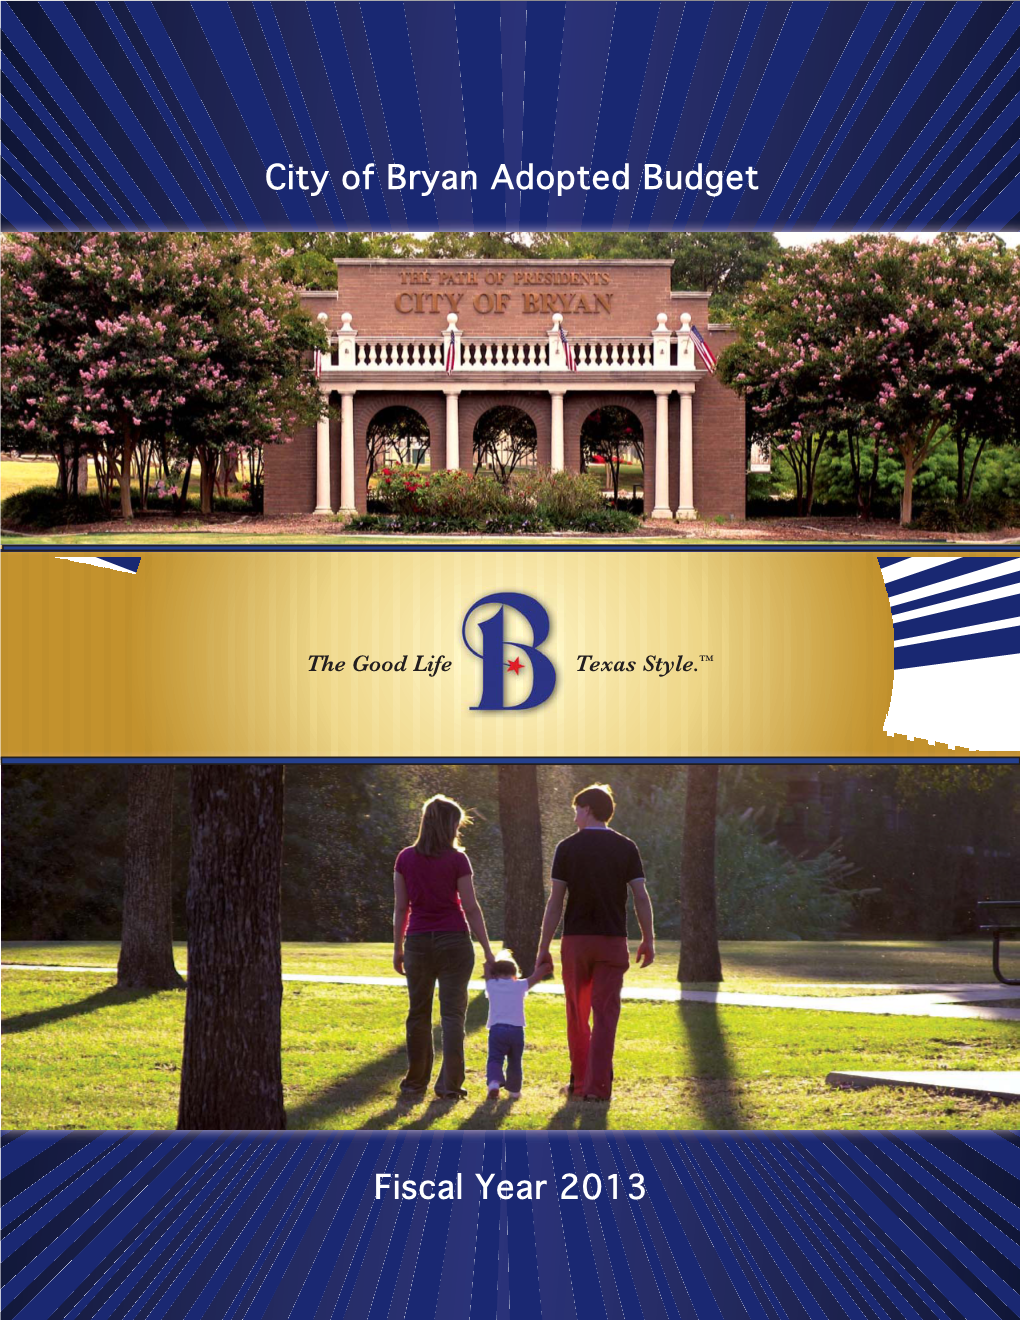 Fiscal Year 2013 Budget Adopted